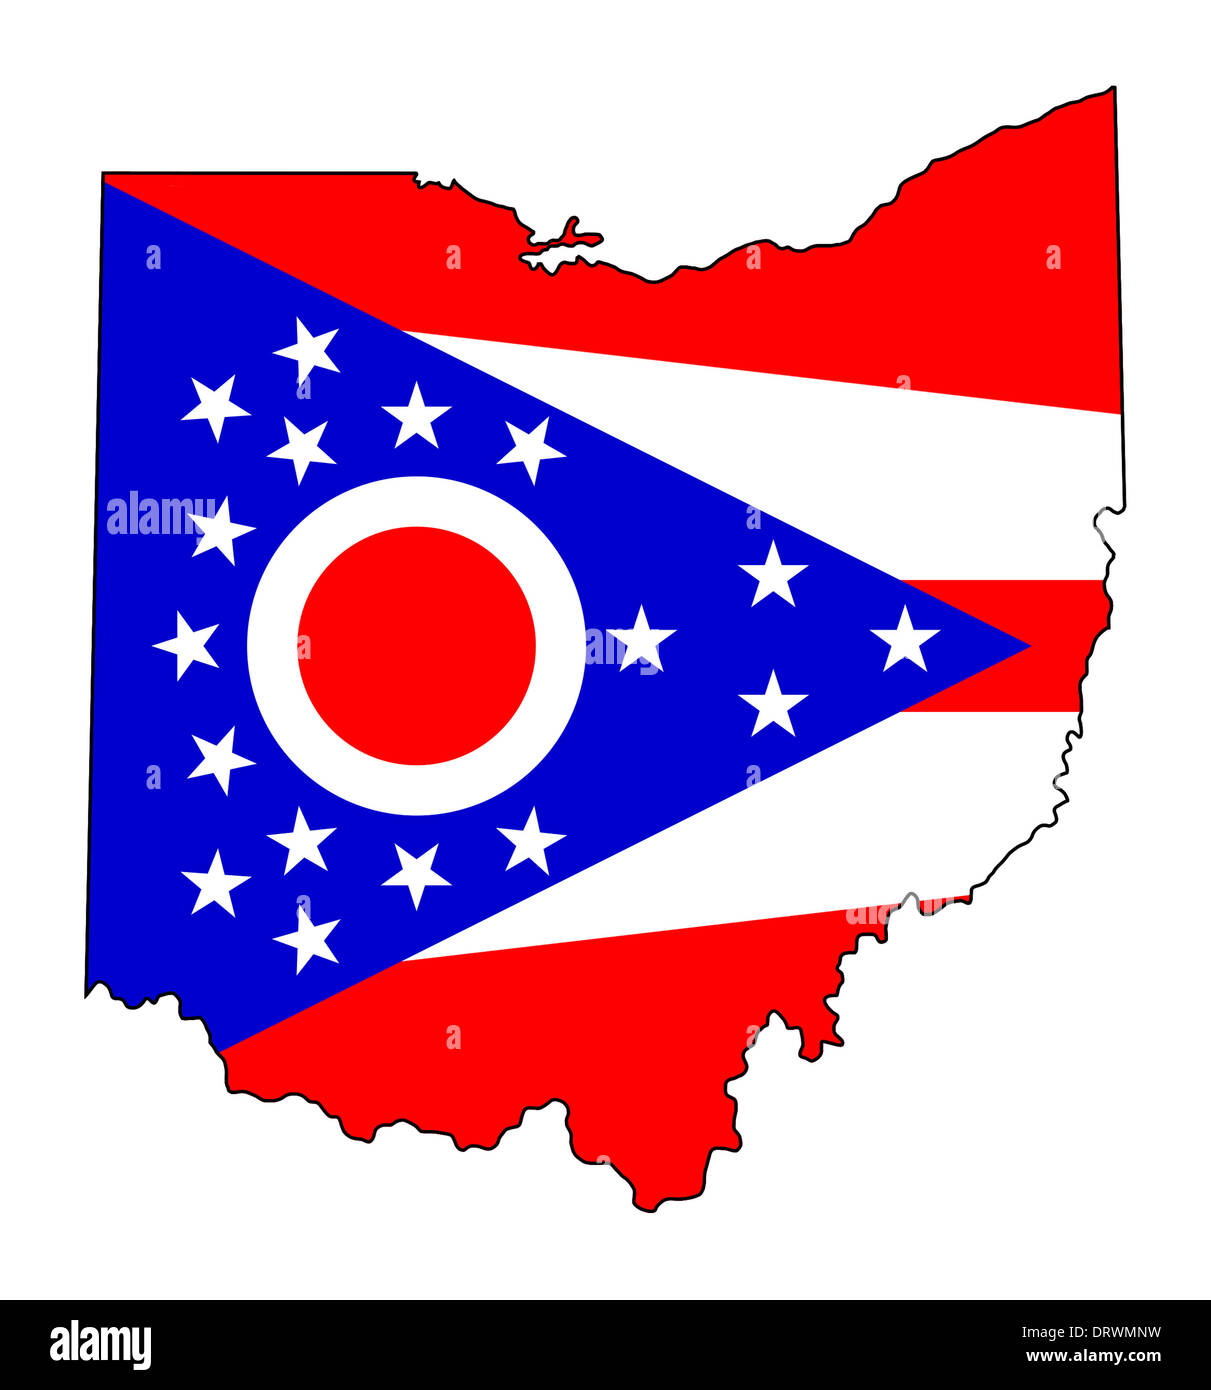 State of Ohio flag map isolated on a white background, U.S.A. Stock Photo